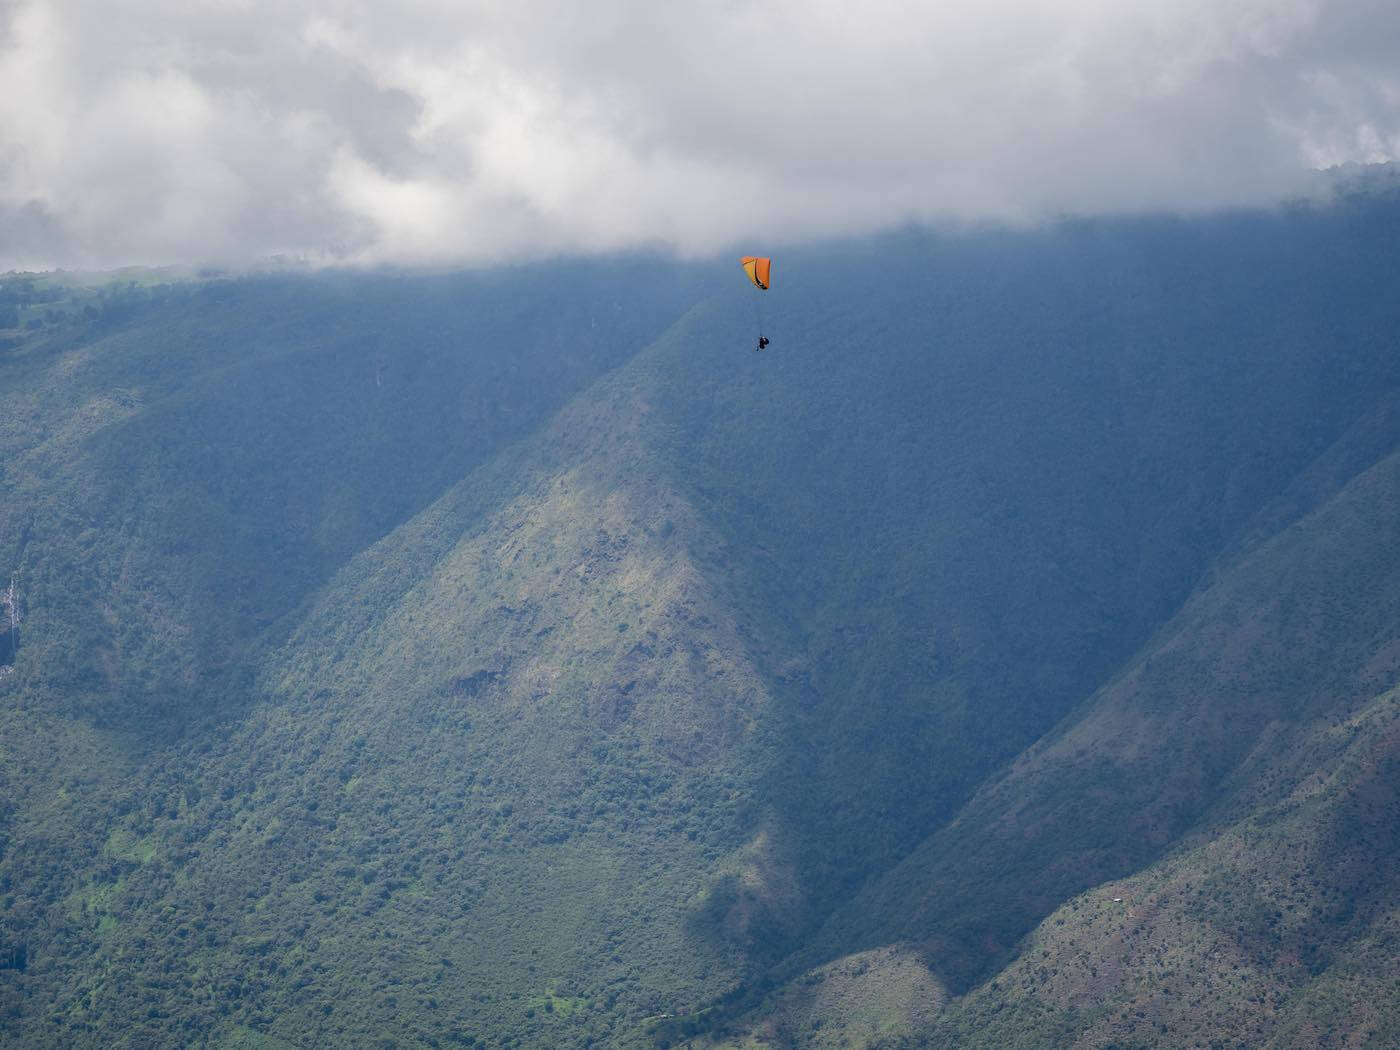 Chris paragliding high in the sky